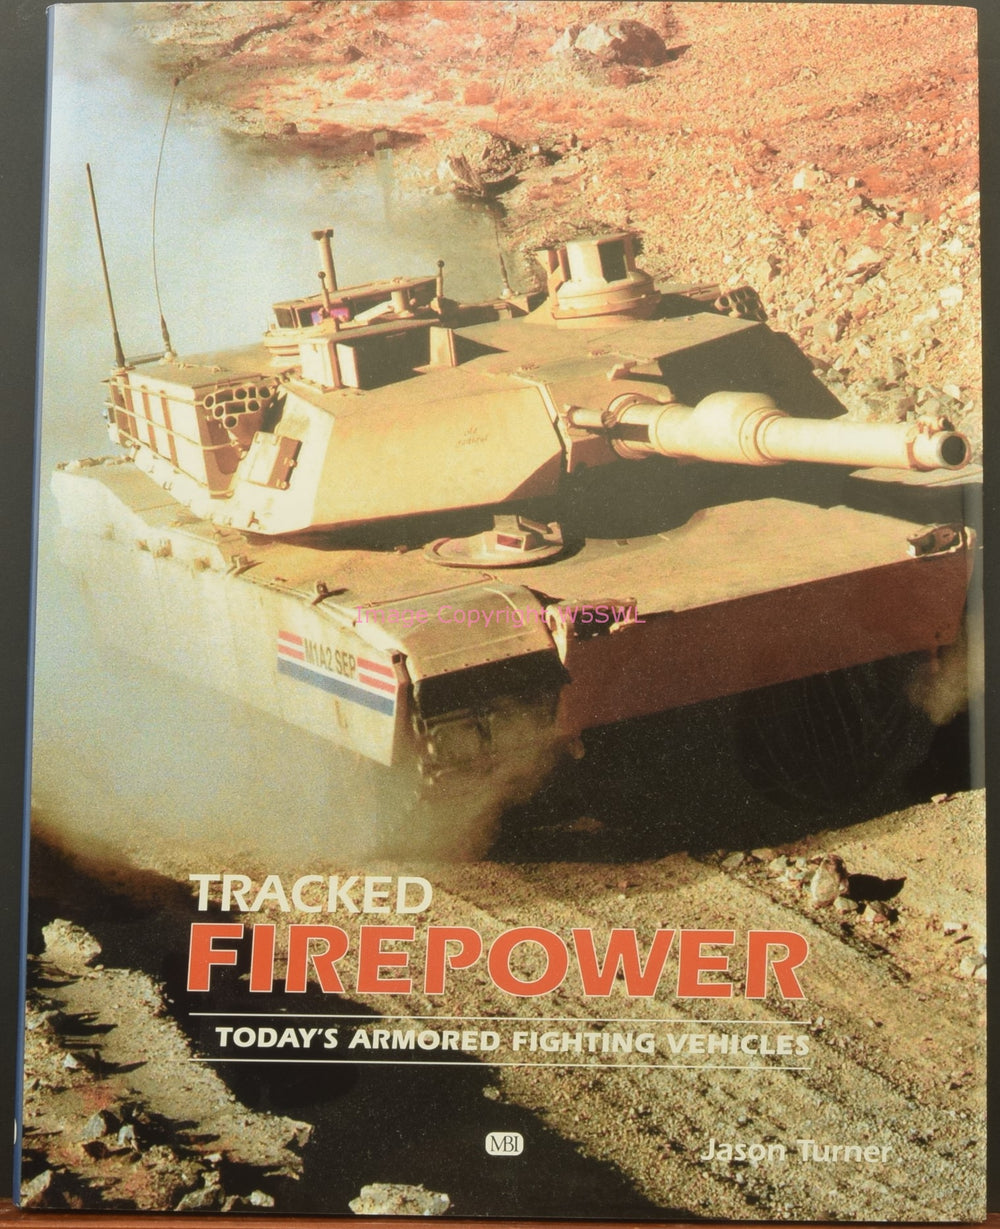 Tracked Firepower - Today's Armored Fighting Vehicles - Dave's Hobby Shop by W5SWL